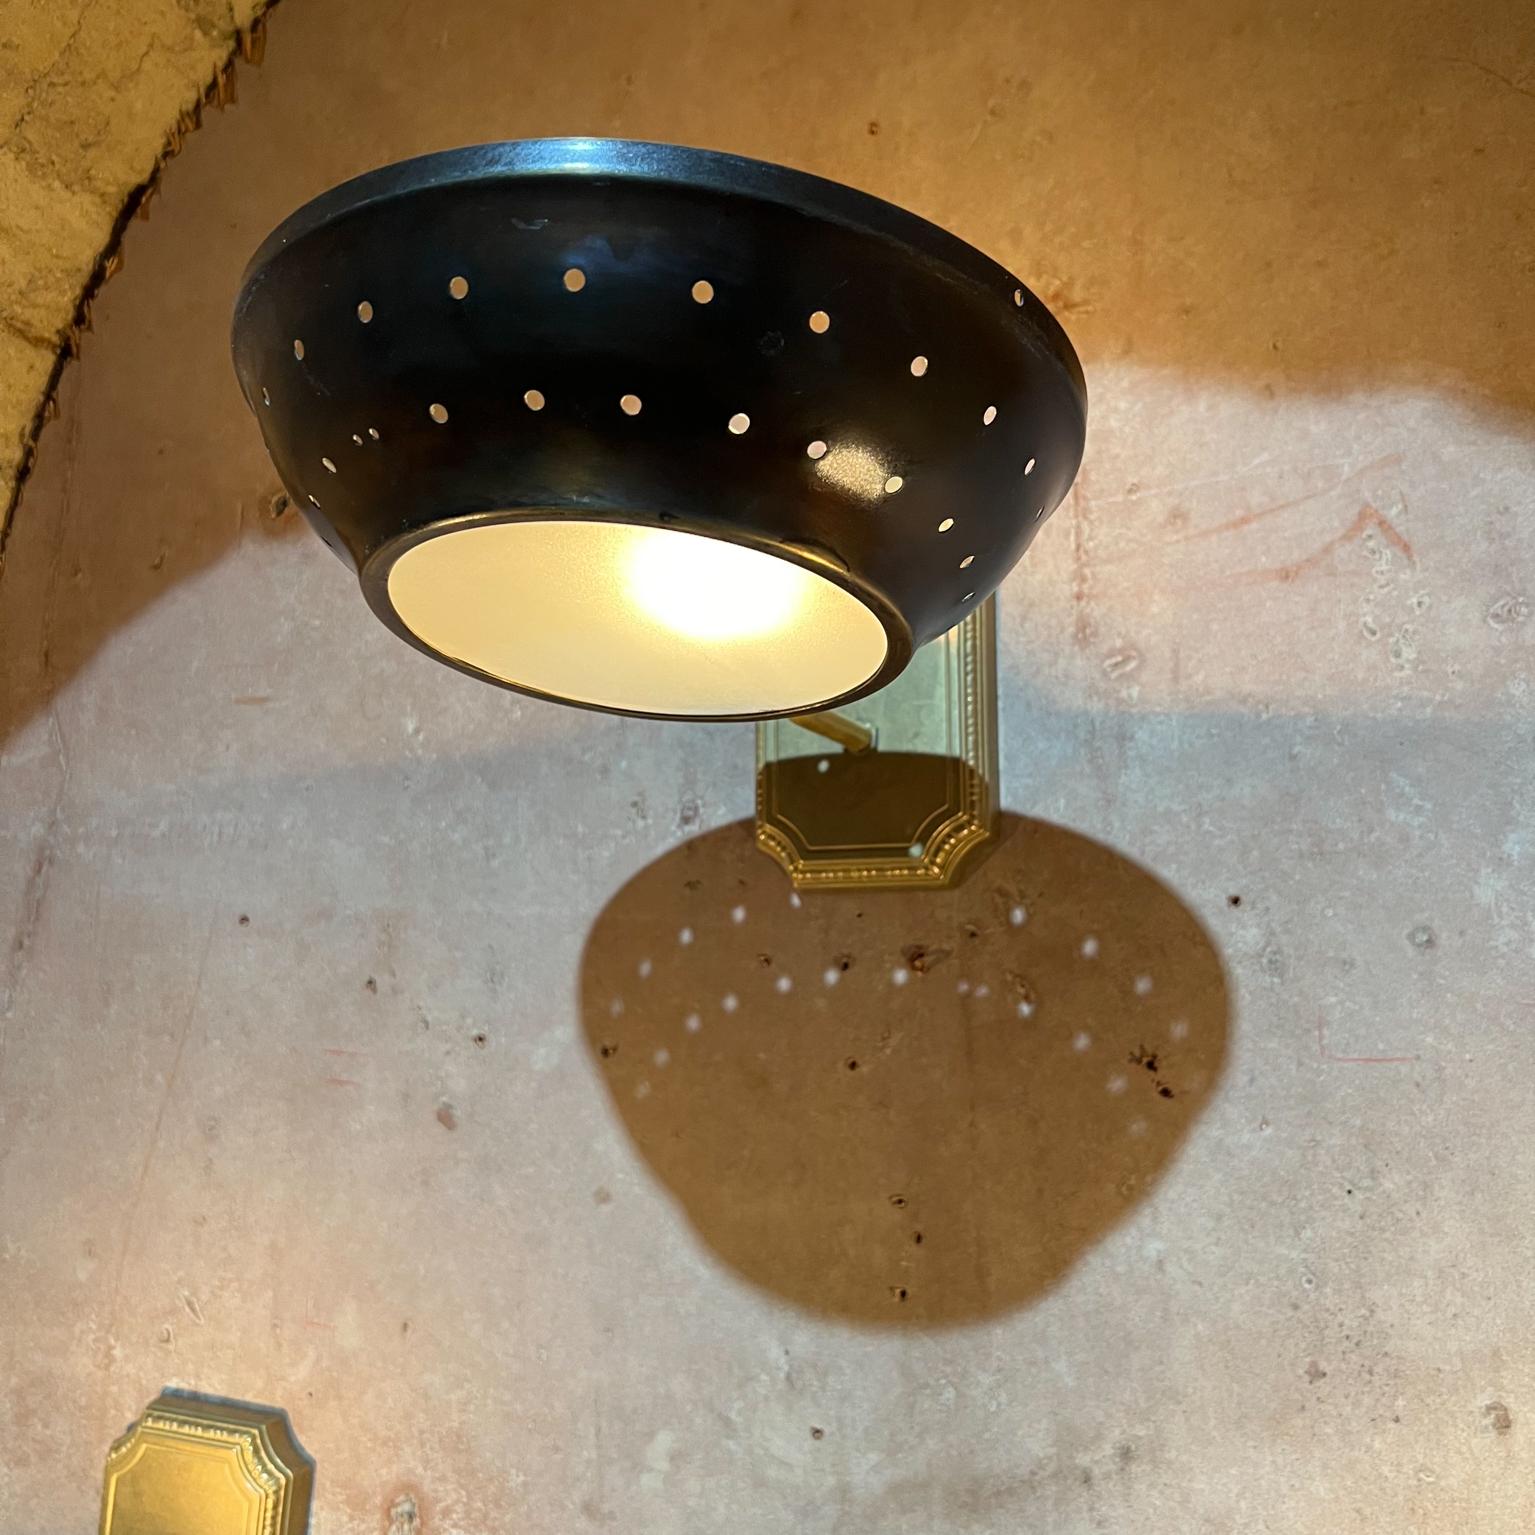 1950s Modern Atomic three patinated brass wall sconces perforated round saucer dish shade
Lamps are in patinated brass with frosted glass
Provides for a lovely light display
12 deep x 8.5 wide x 6.5 tall
Preowned original unrestored vintage